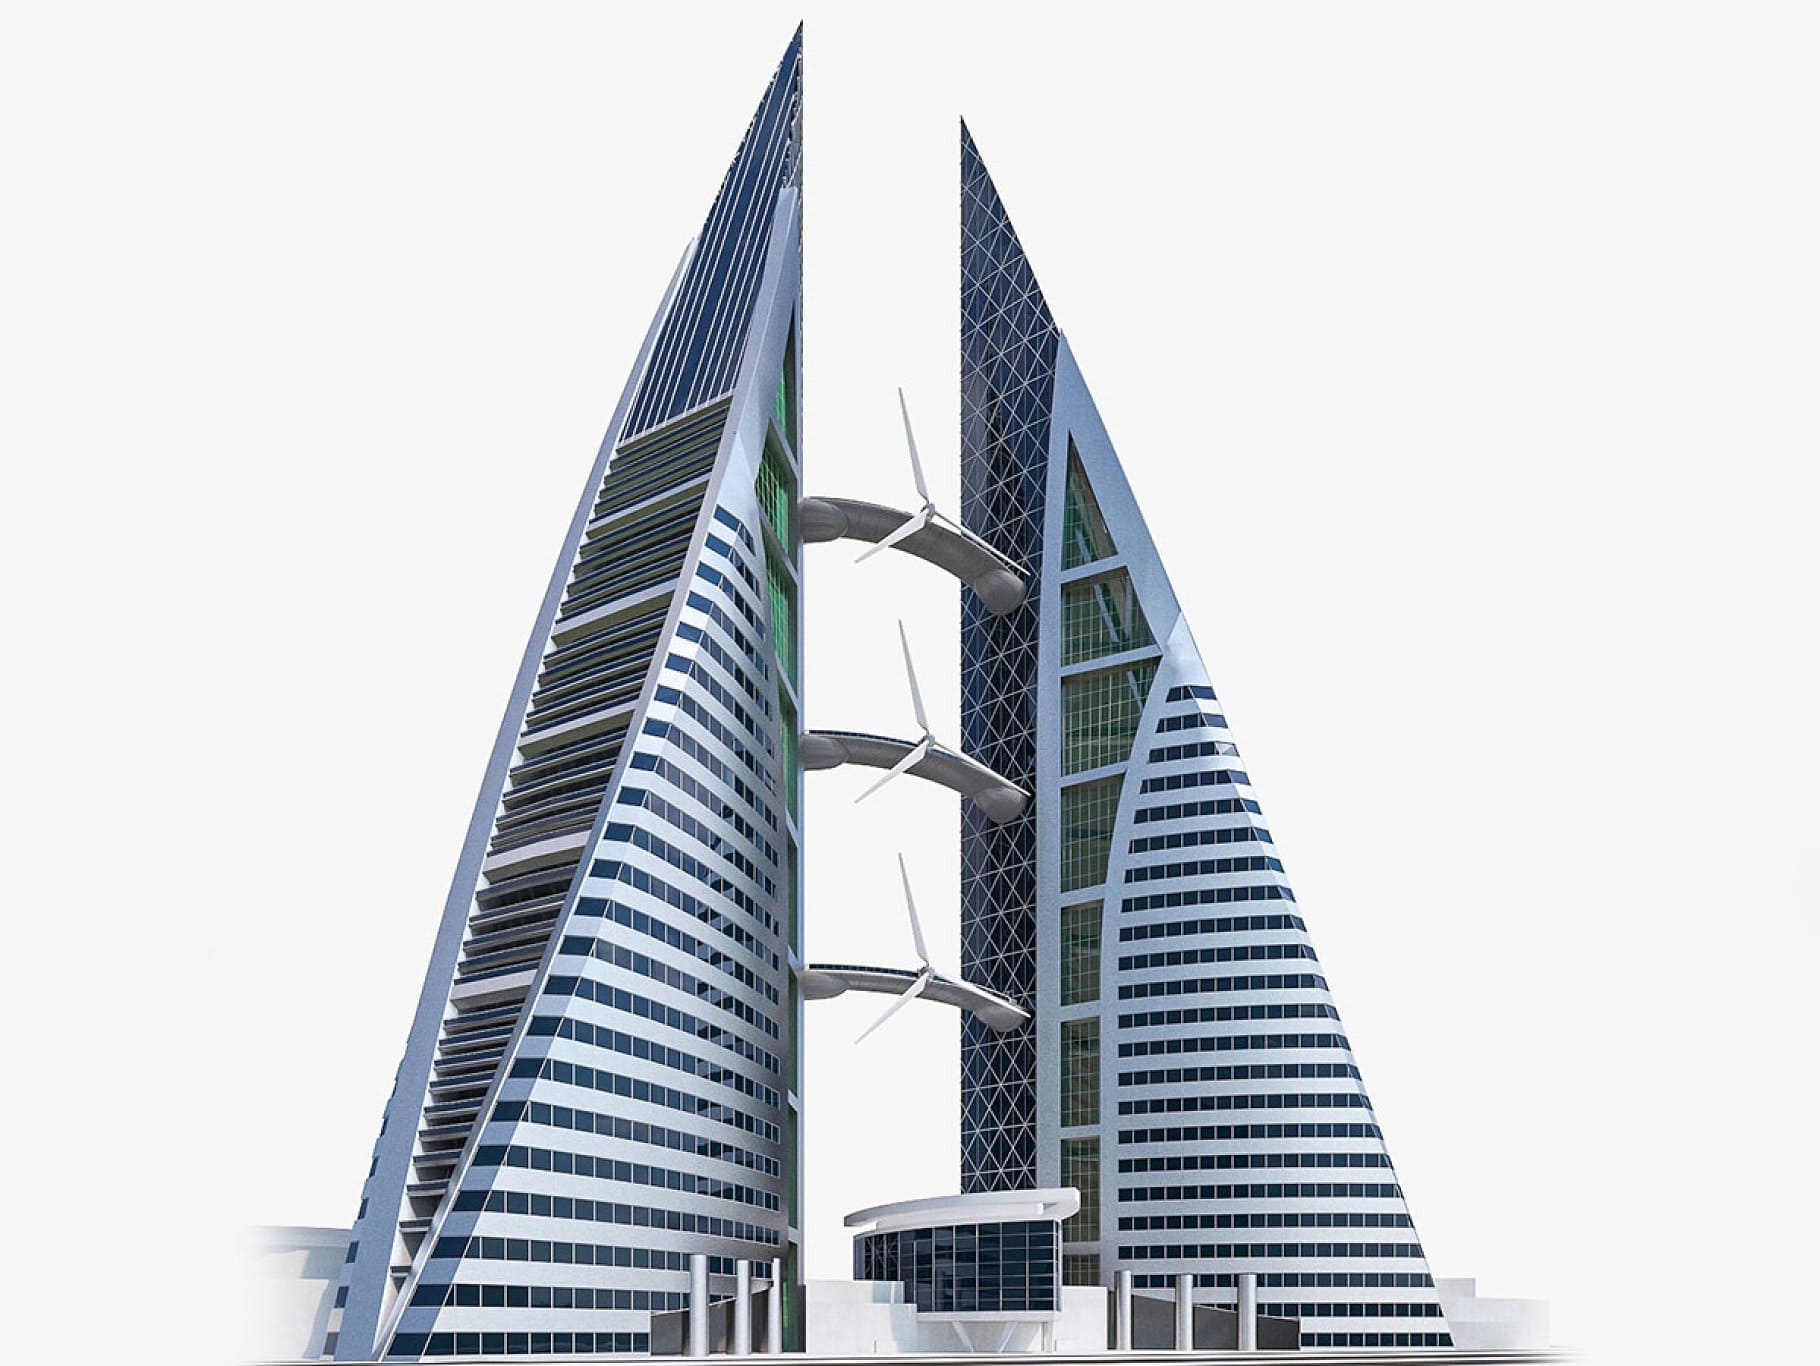 This is a real-world-size model of Bahrain World Trade Center made by the professional architect.